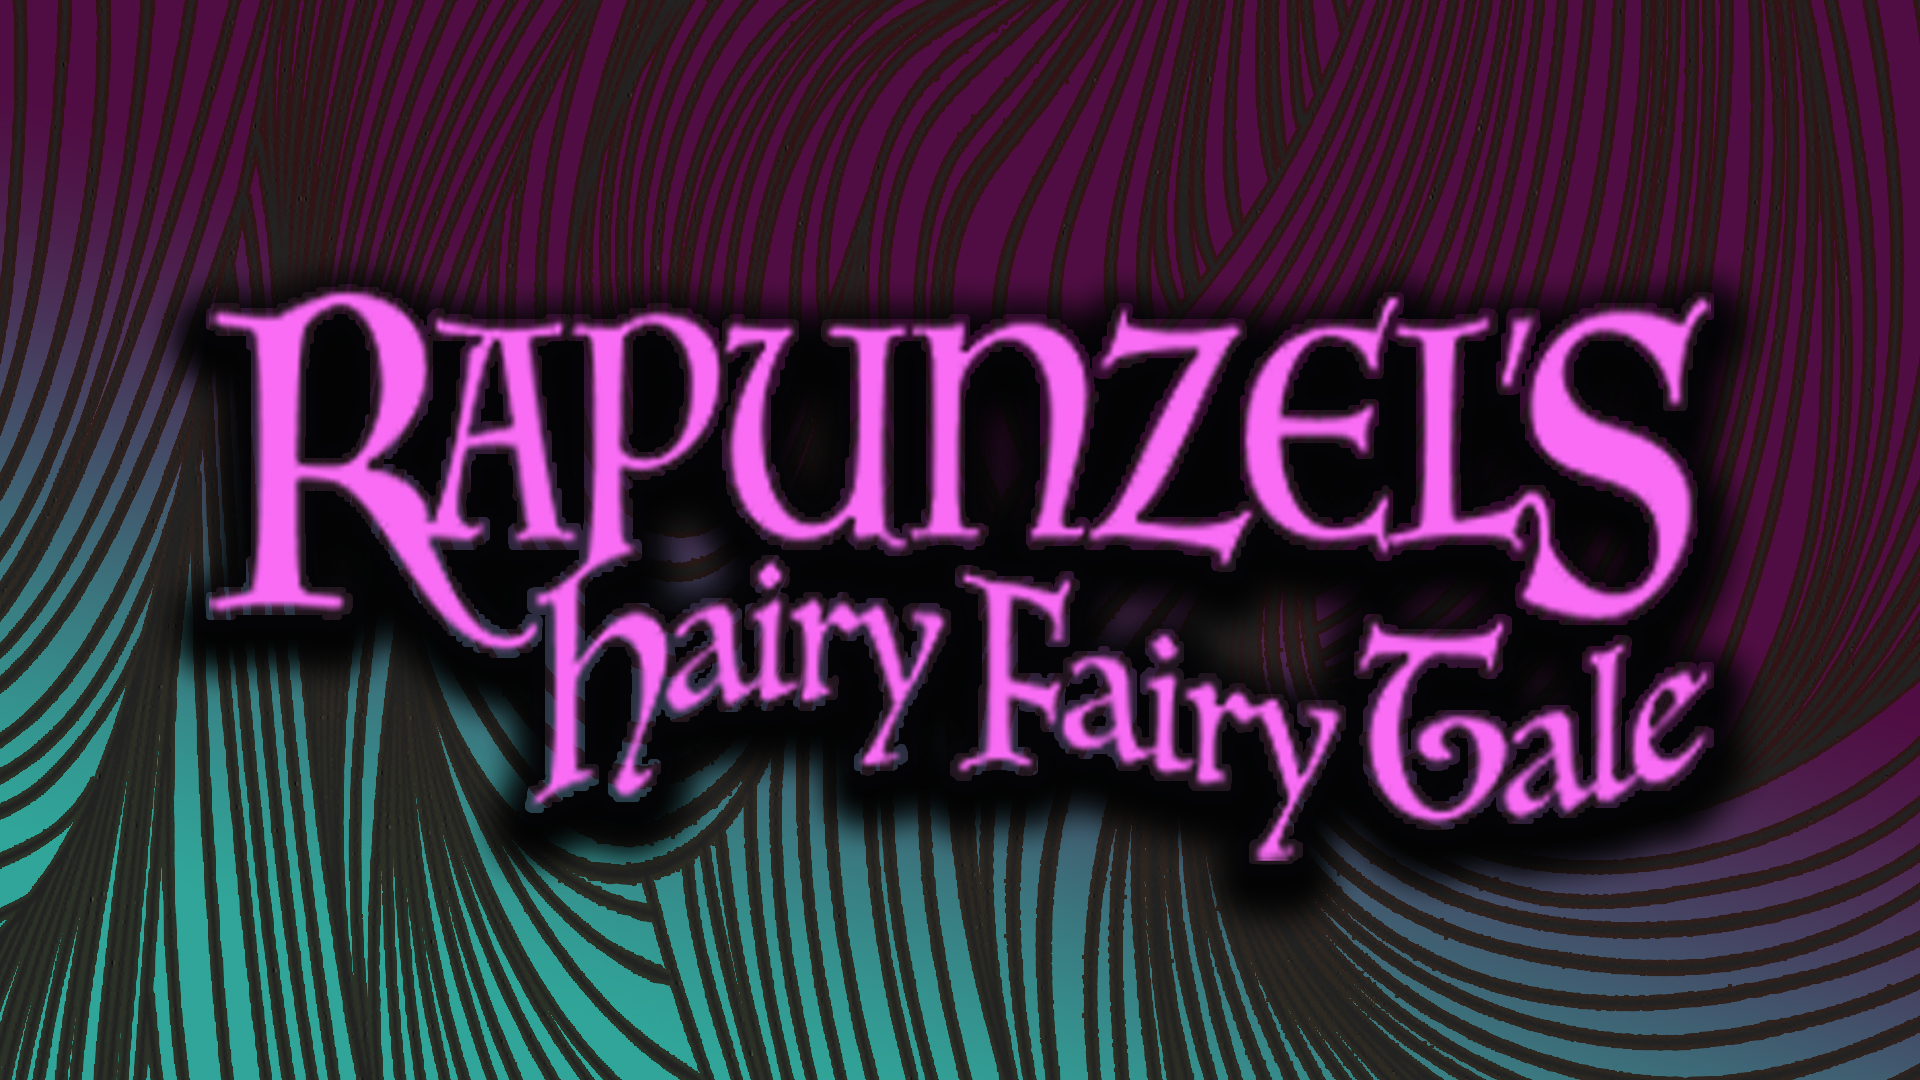 The classic fairy tale of “Rapunzel” comes to life in an exciting world-premiere musical adaptation adventure featuring everyone’s favorite long-locked lady in a tower. But don’t forget the array of other characters braided in this hairy fairy tale, comically played by only two actors! Yes, your read that correctly. ONLY TWO ACTORS! This fresh new adaptation will make your audiences throw their heads of hair back in laughter and delight as two incredibly talented and versatile actors untangle this hairy fairy tale like you’ve never seen it before! 